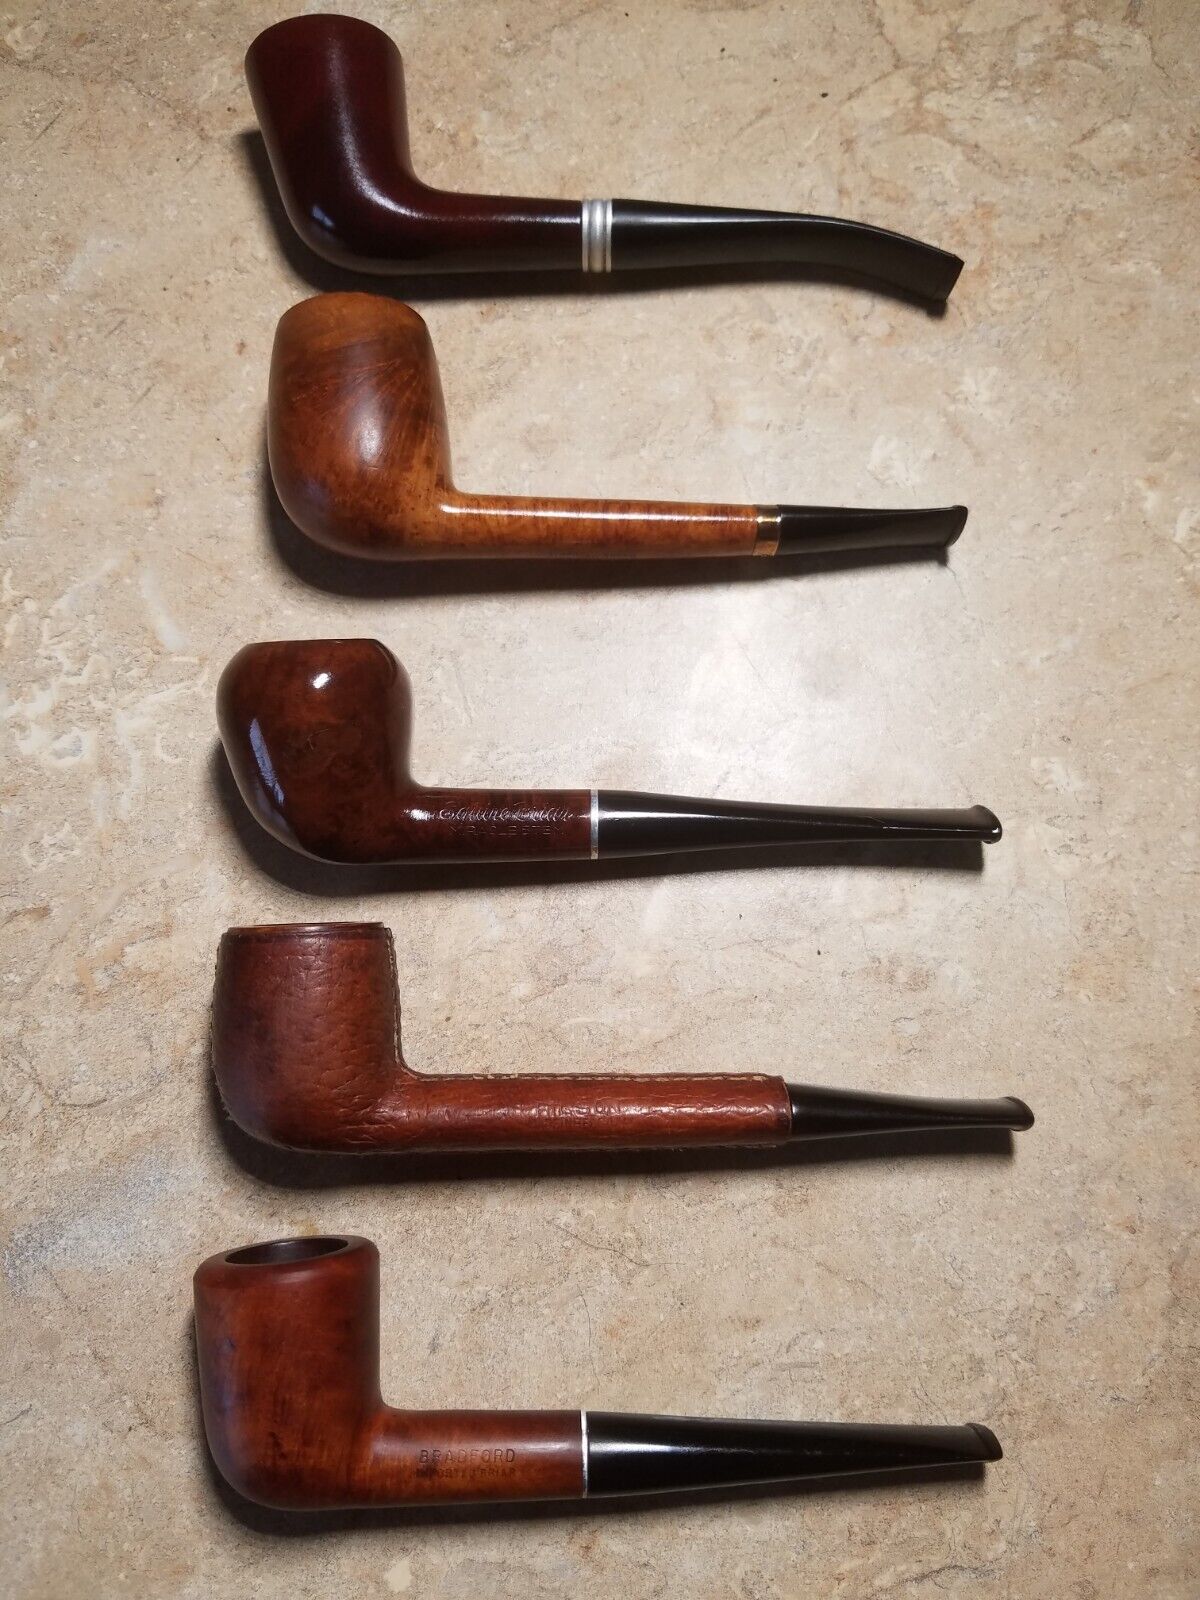 Lot of 5 Vintage Tobacco Pipes